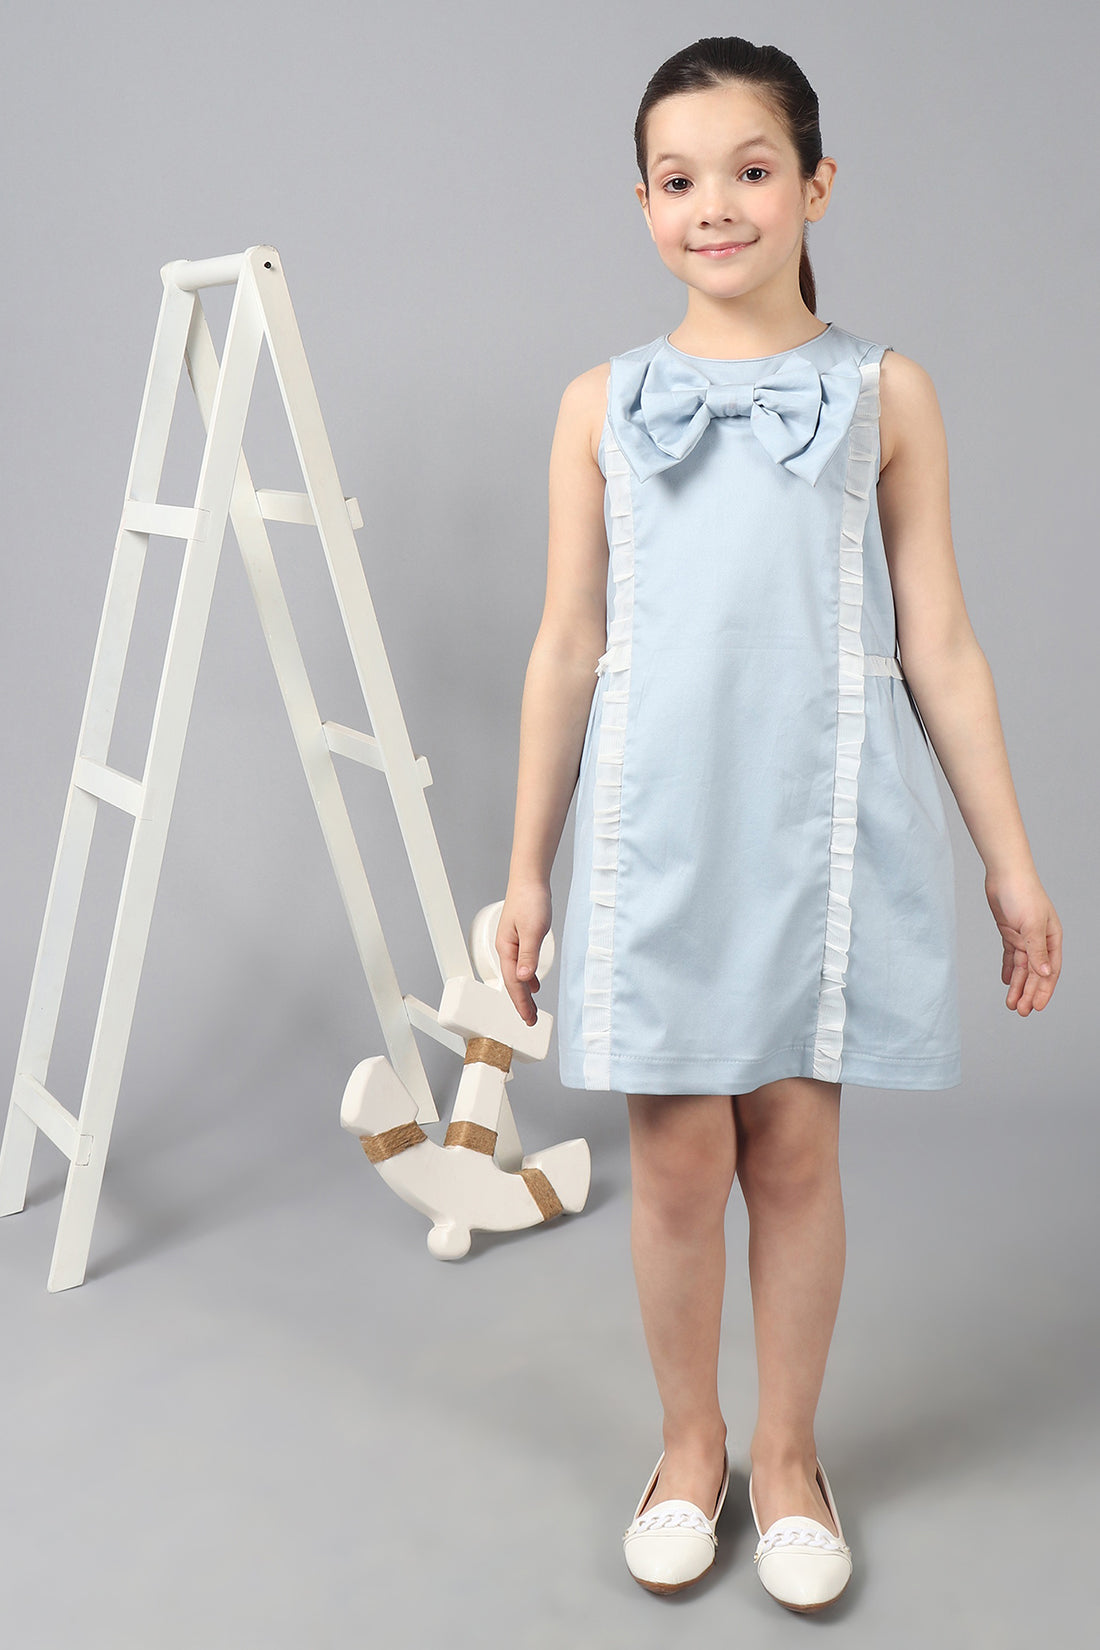 One Friday Kids Girls blue cotton Sleeveless Dress with frills & Bow